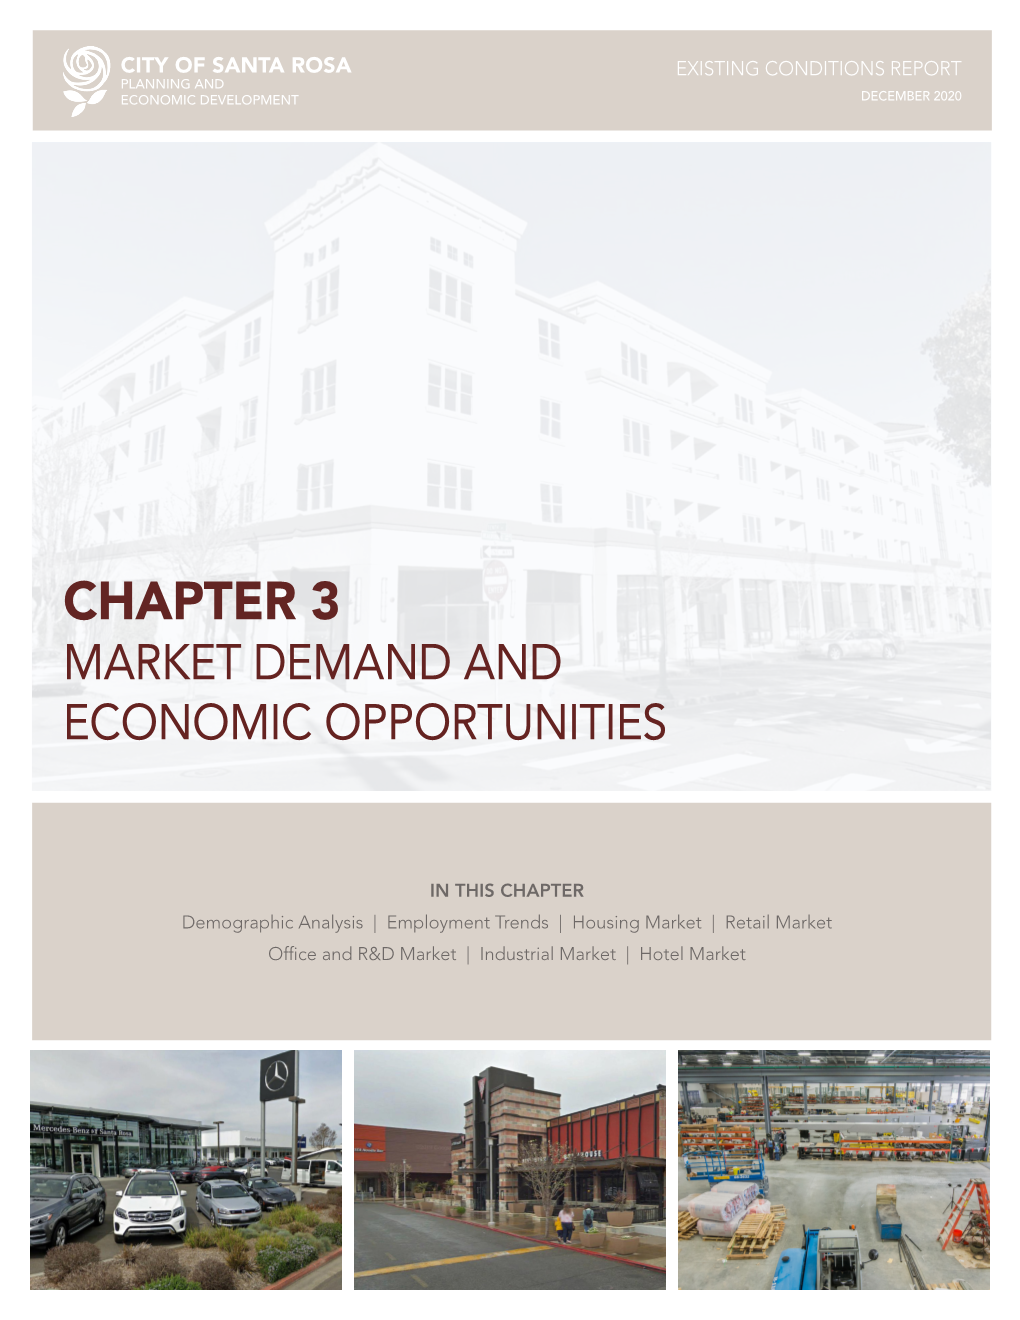 Chapter 3 Market Demand and Economic Opportunities